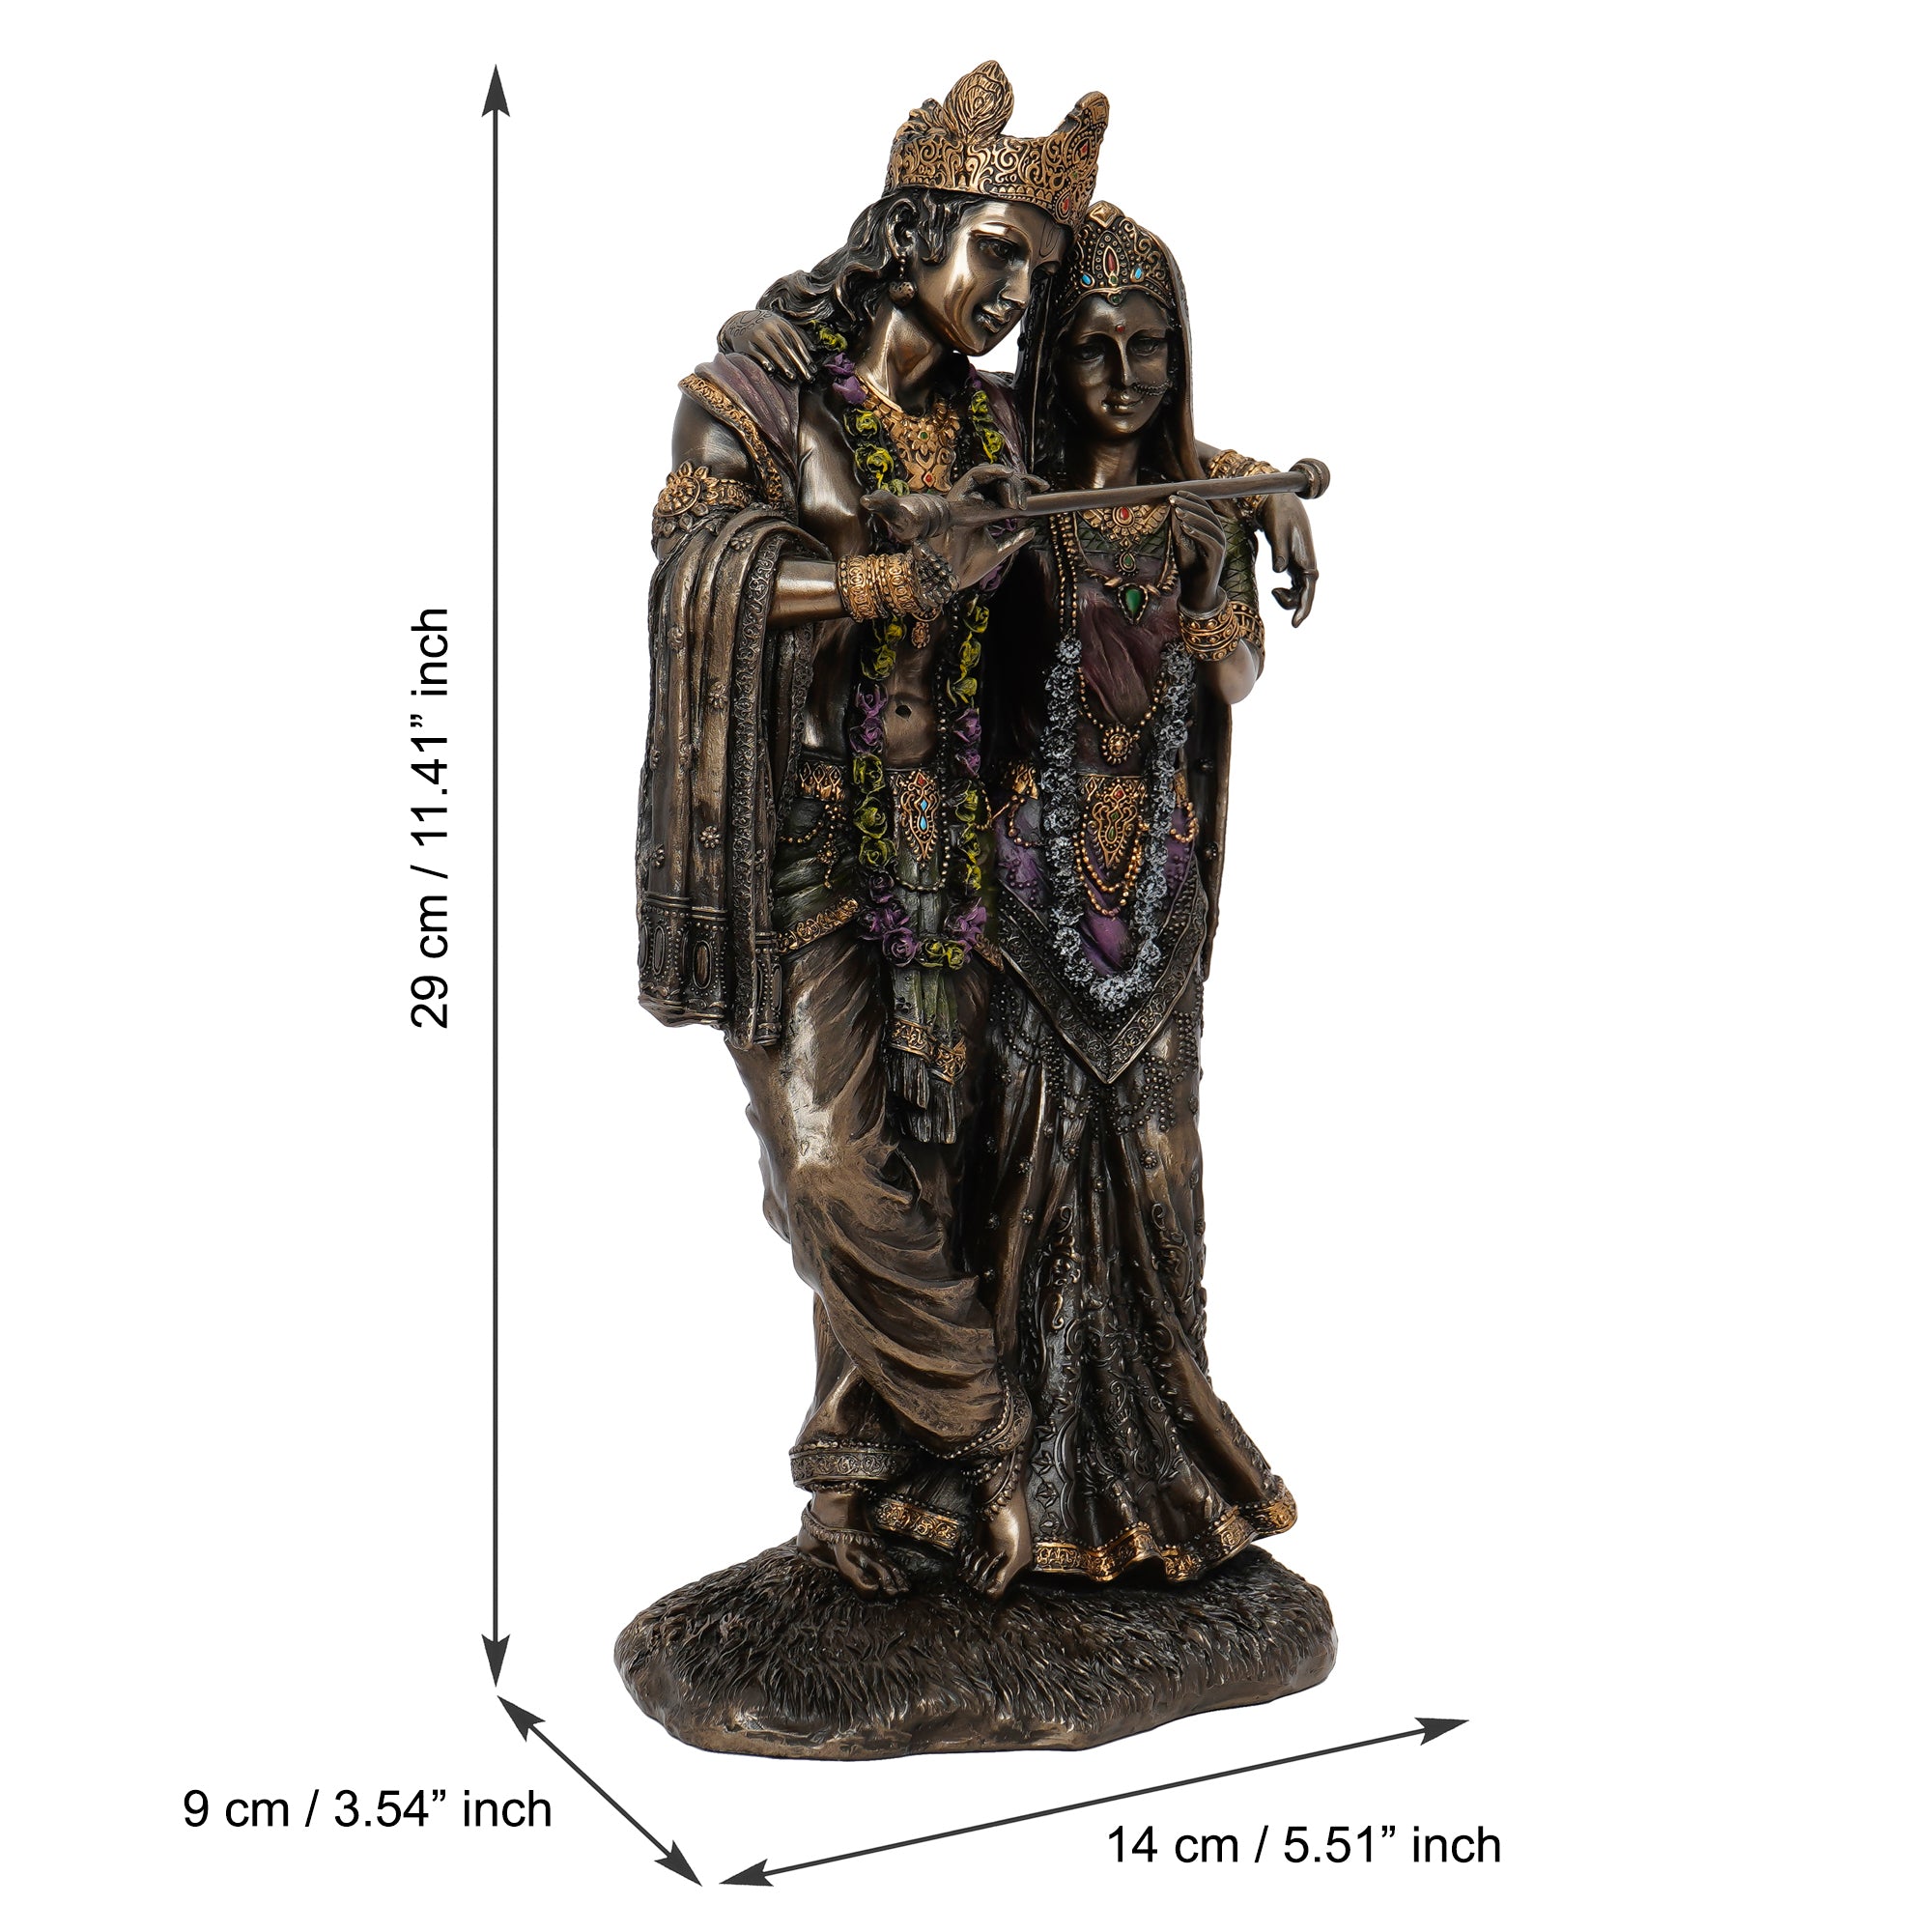 Polyresin and Bronze Decorative Radha Krishna Playing Flute Statue (Brown and Golden) 3